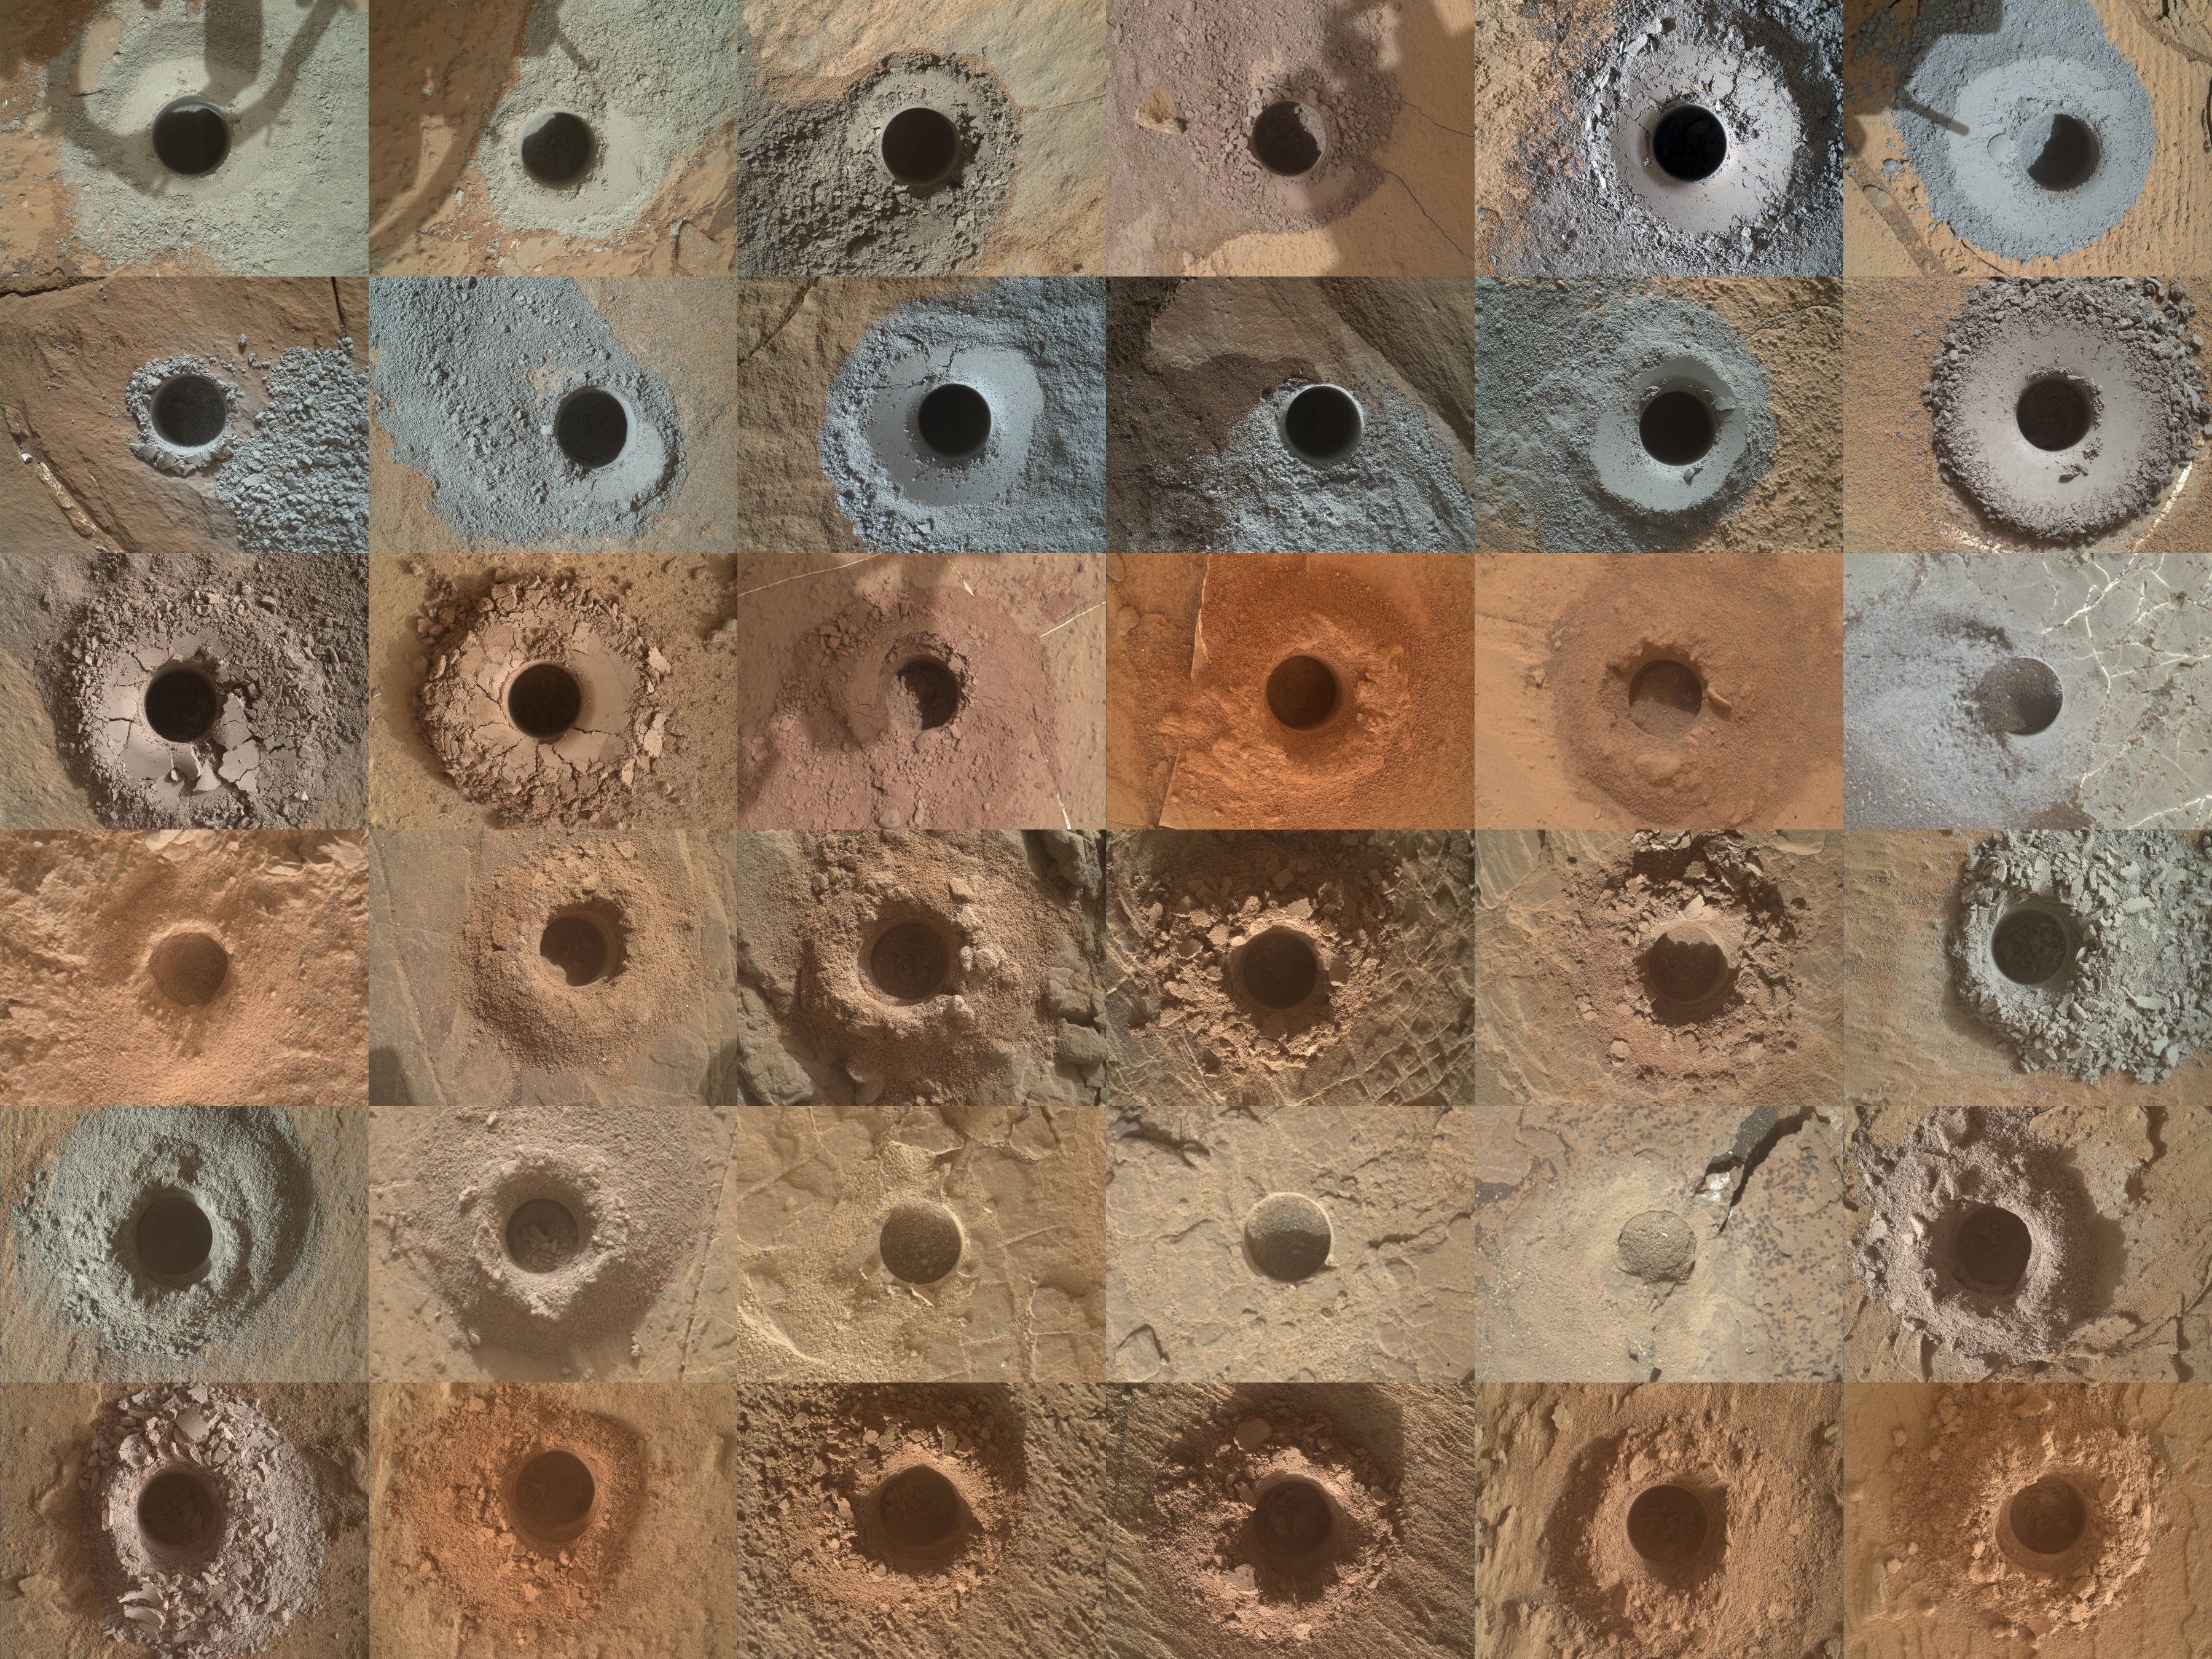 A sequence of 36 drill holes (six across and six down) that show the variety of soil sampled on Mars.